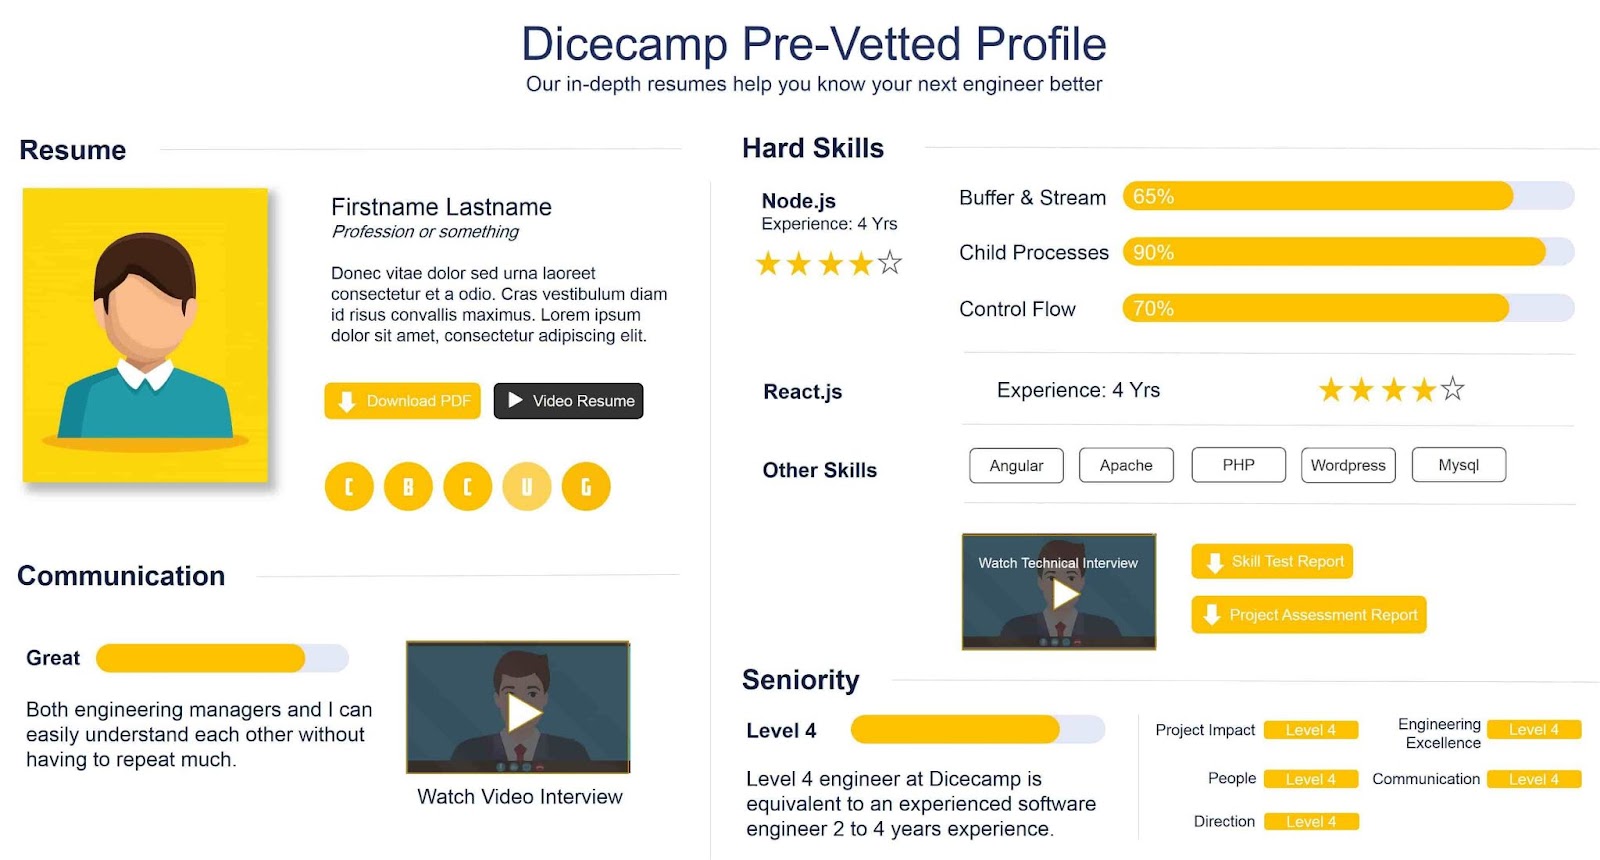 Dicecamp candidate resume is built using AI and machine learning